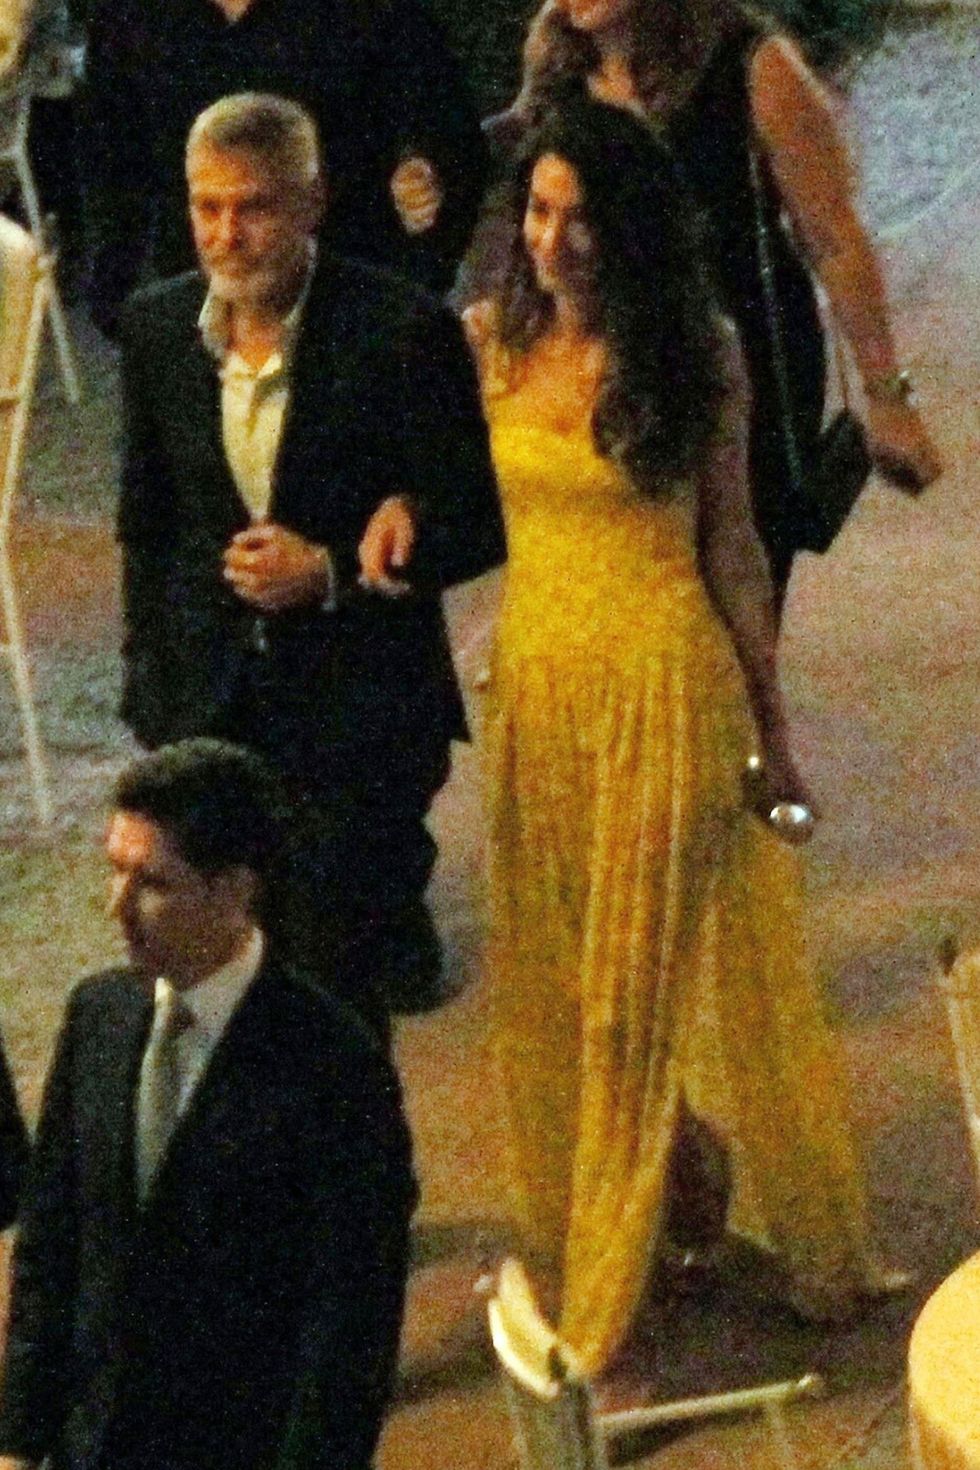 Actor George Clooney and wife Amal Clooney night out with friends in Italy.